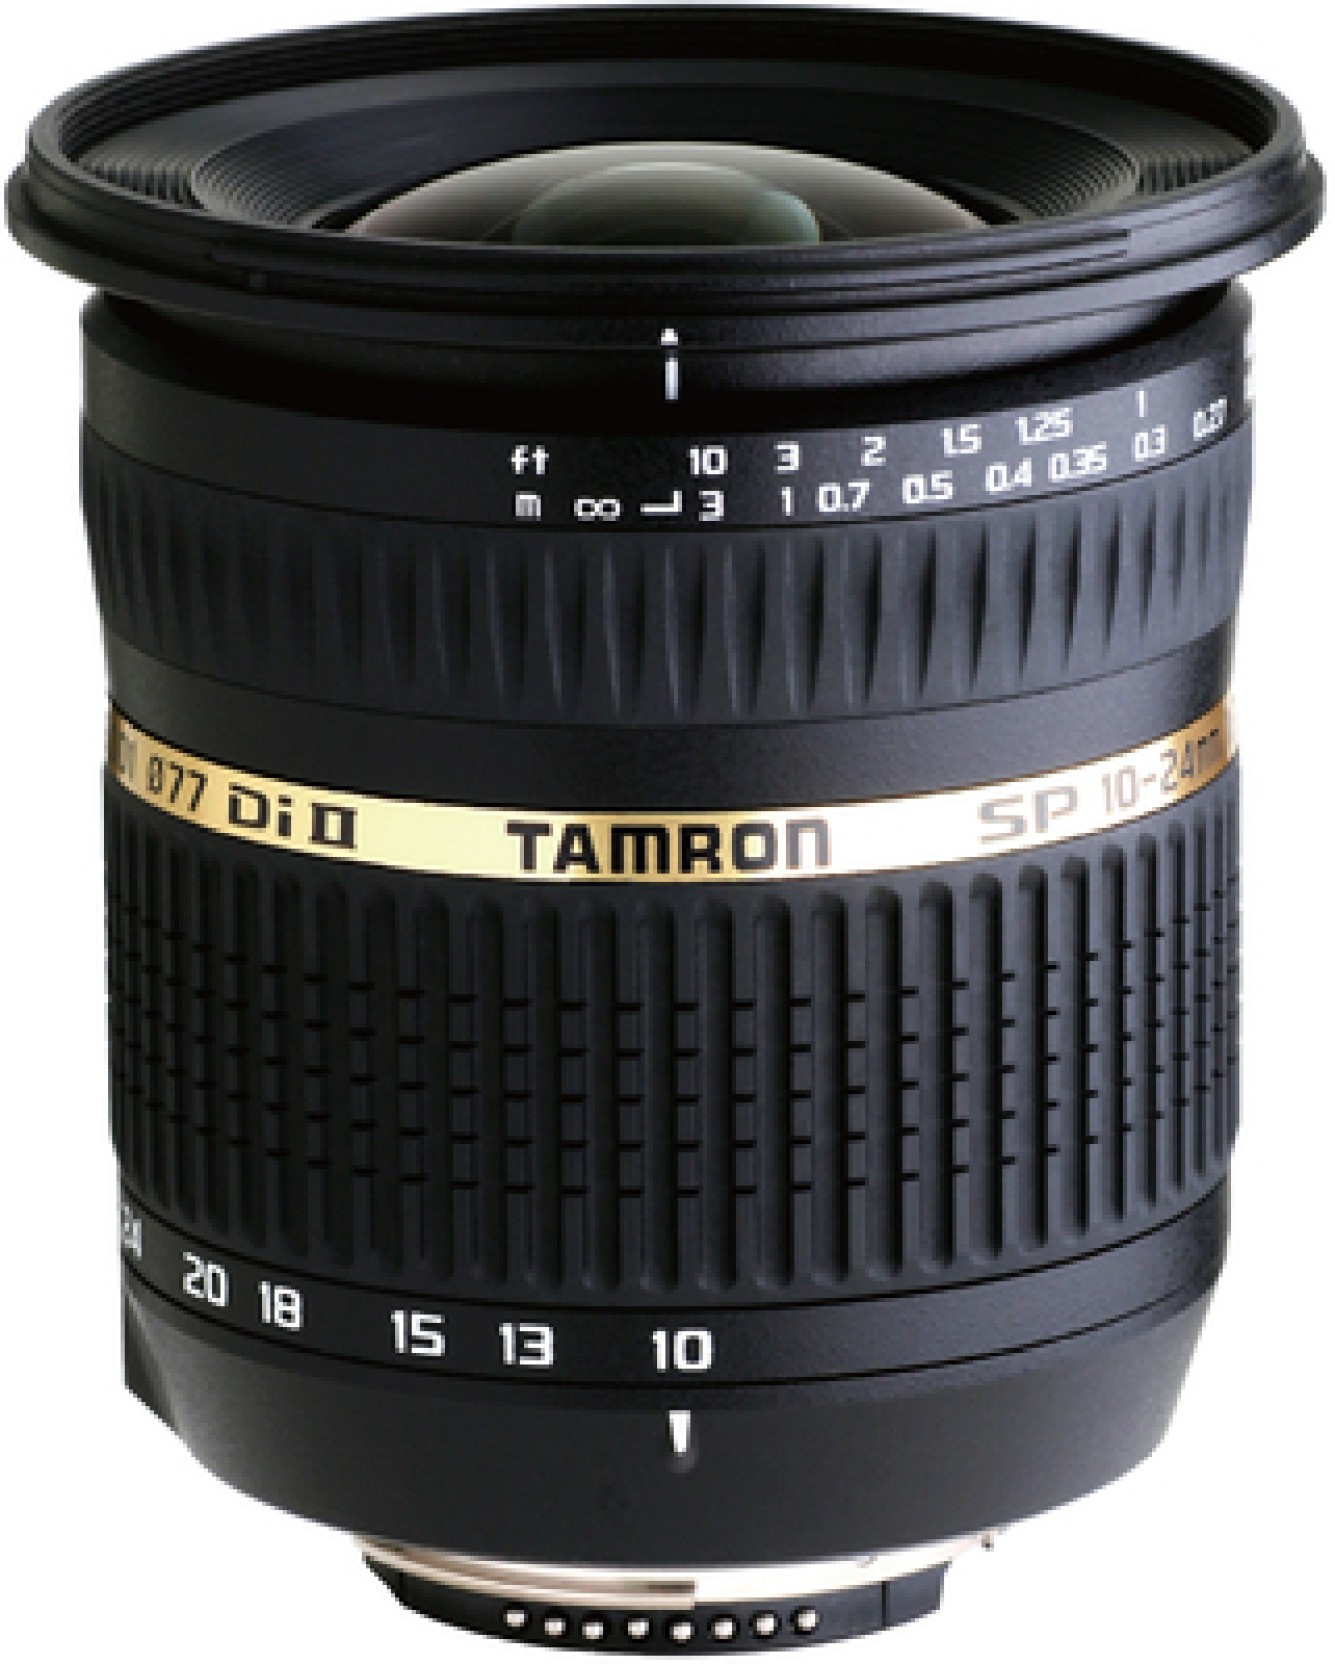 Tamron SP AF 10 - 24 mm F/3.5-4.5 Di-II LD Aspherical (IF) for Canon